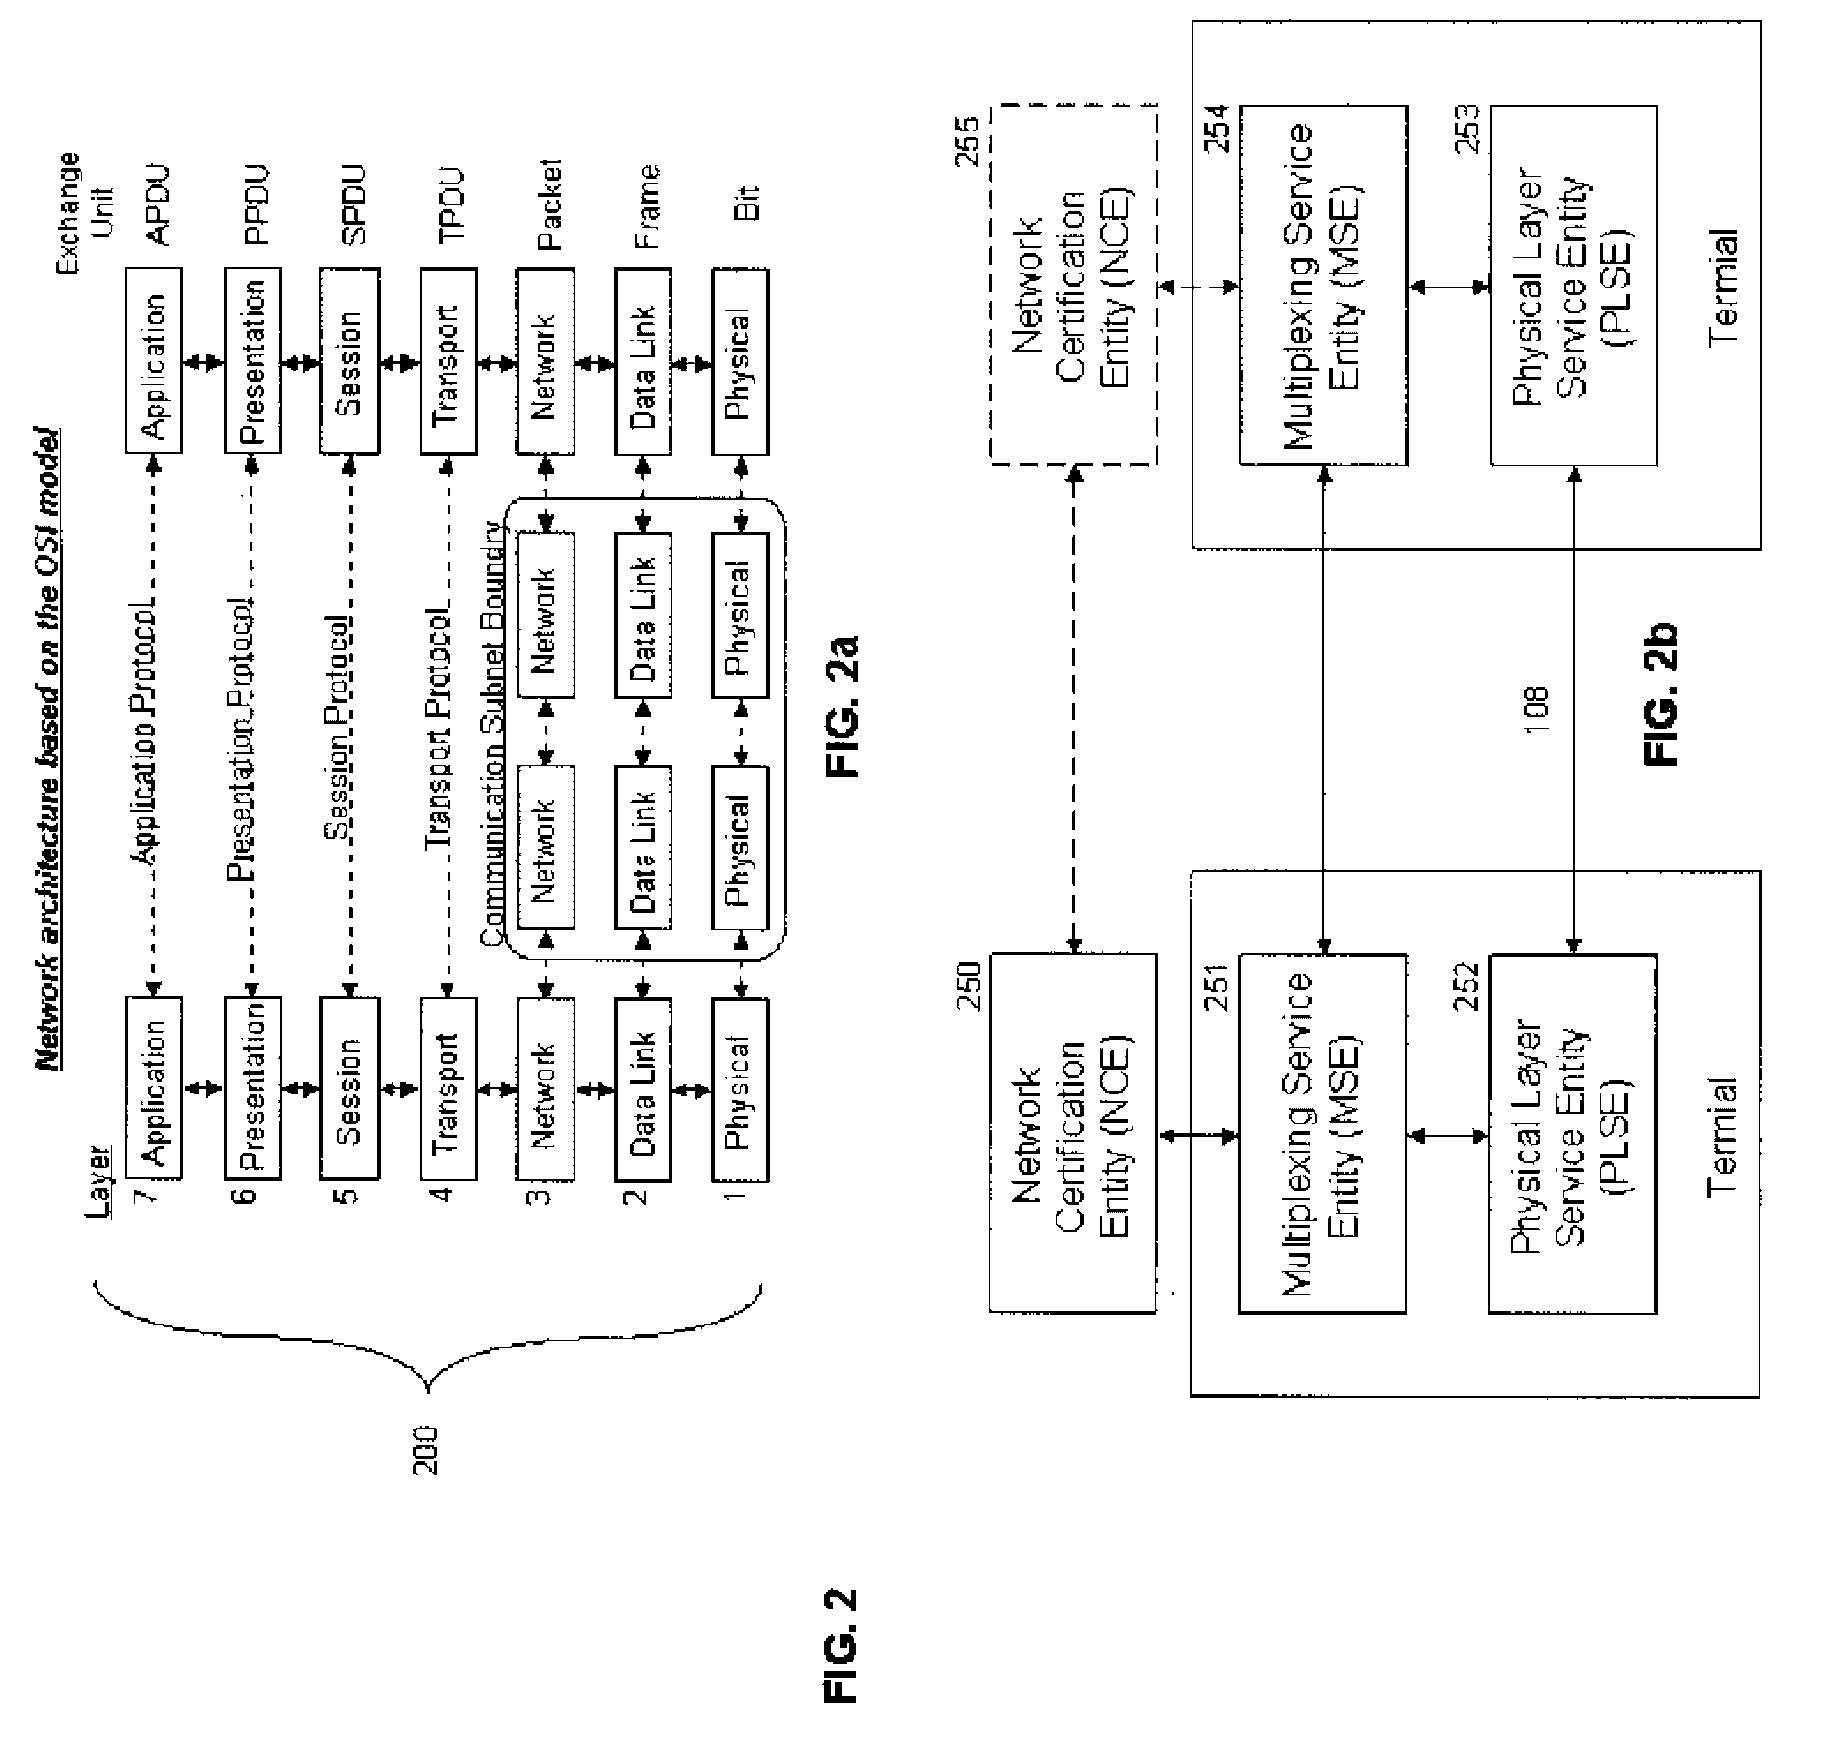 System and method for performing in-service fiber optic network certification